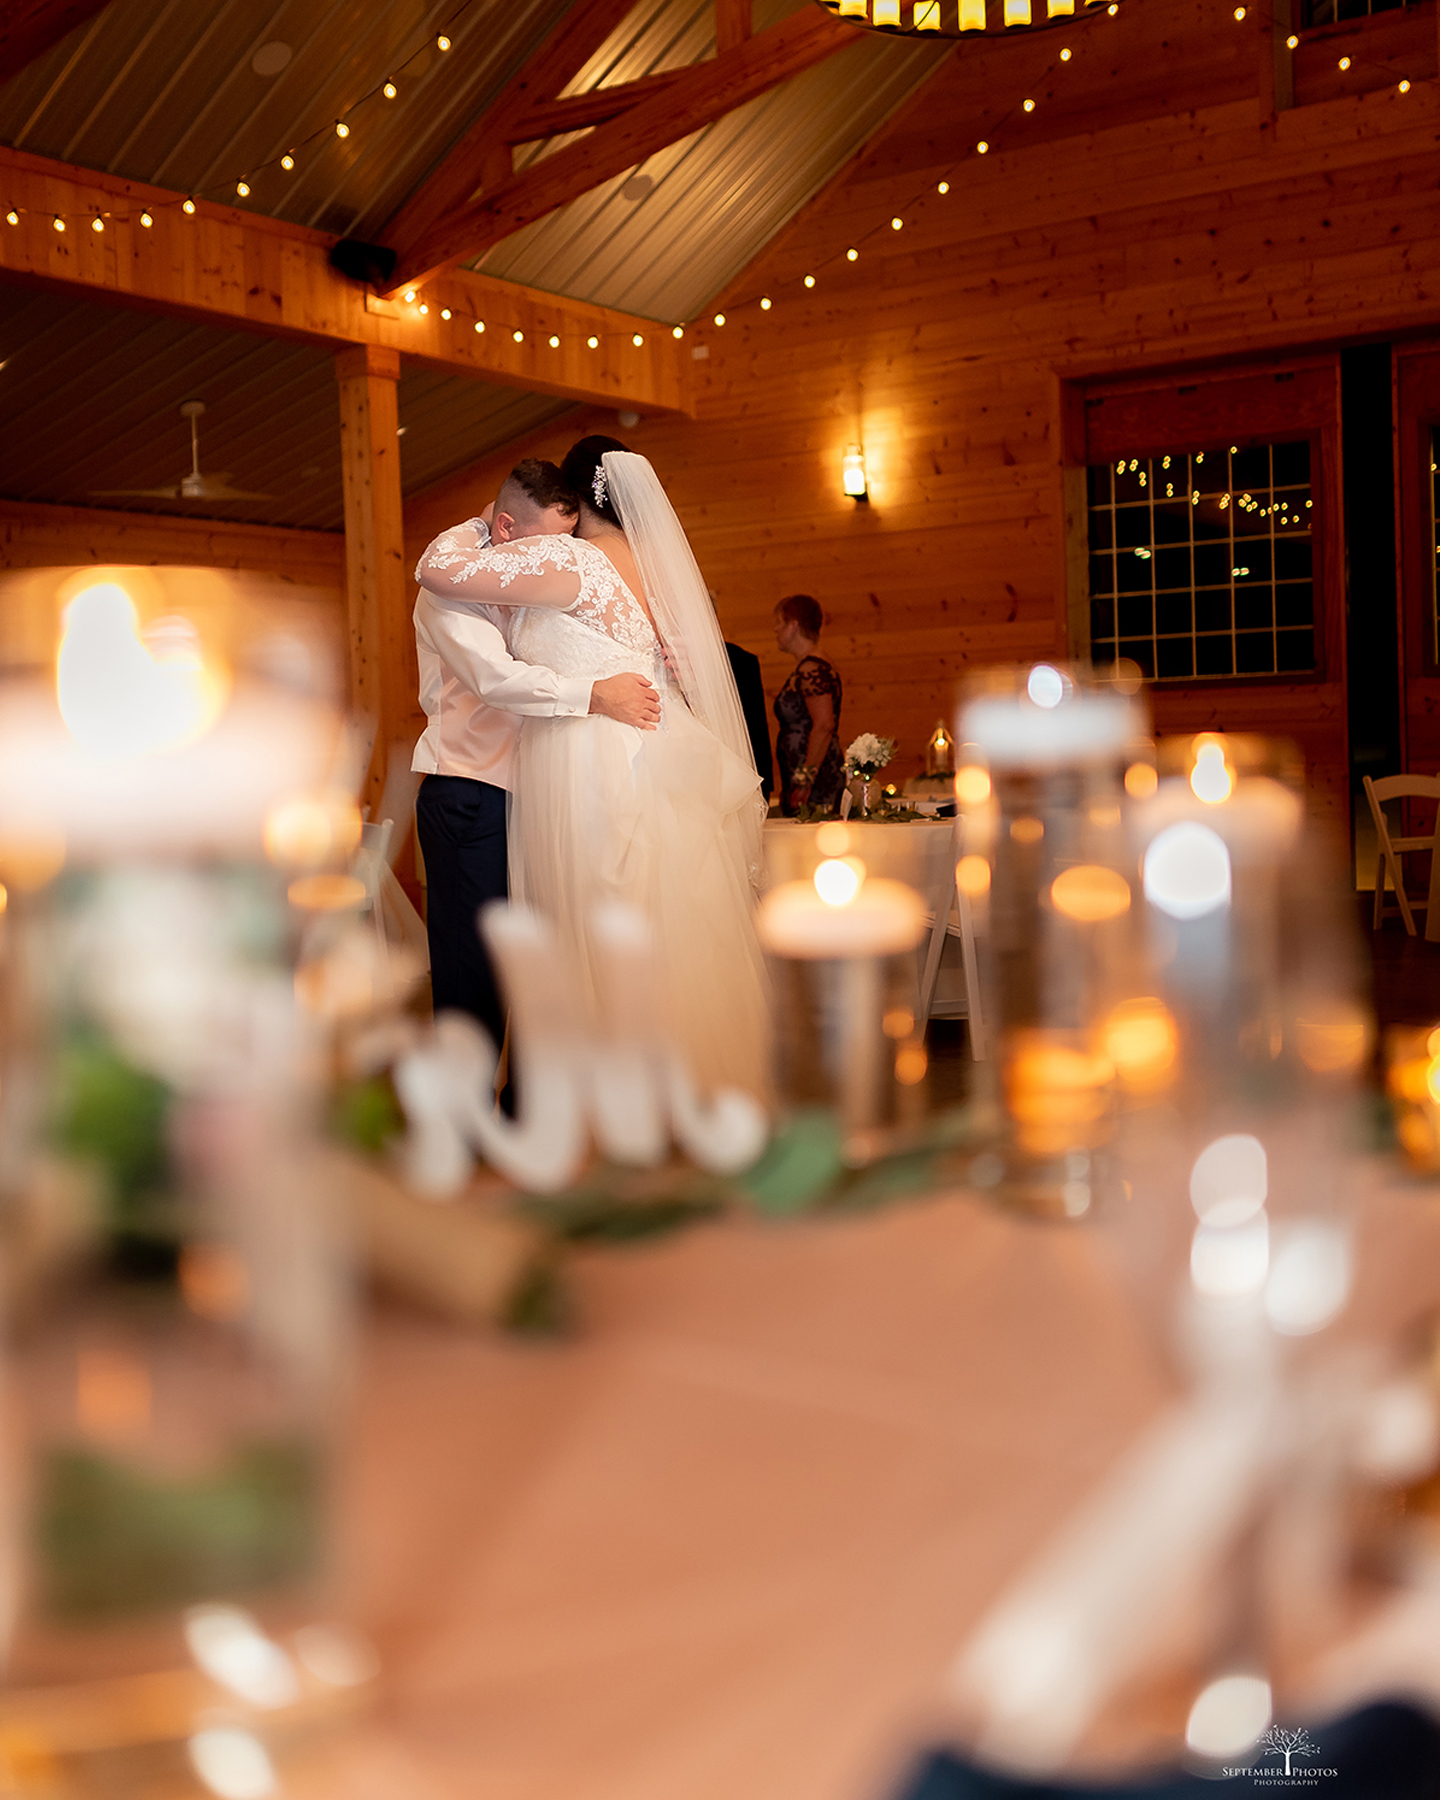 Samantha and Johnathan last dance at their bluch, navy, and gold wedding at Walnut Hill.